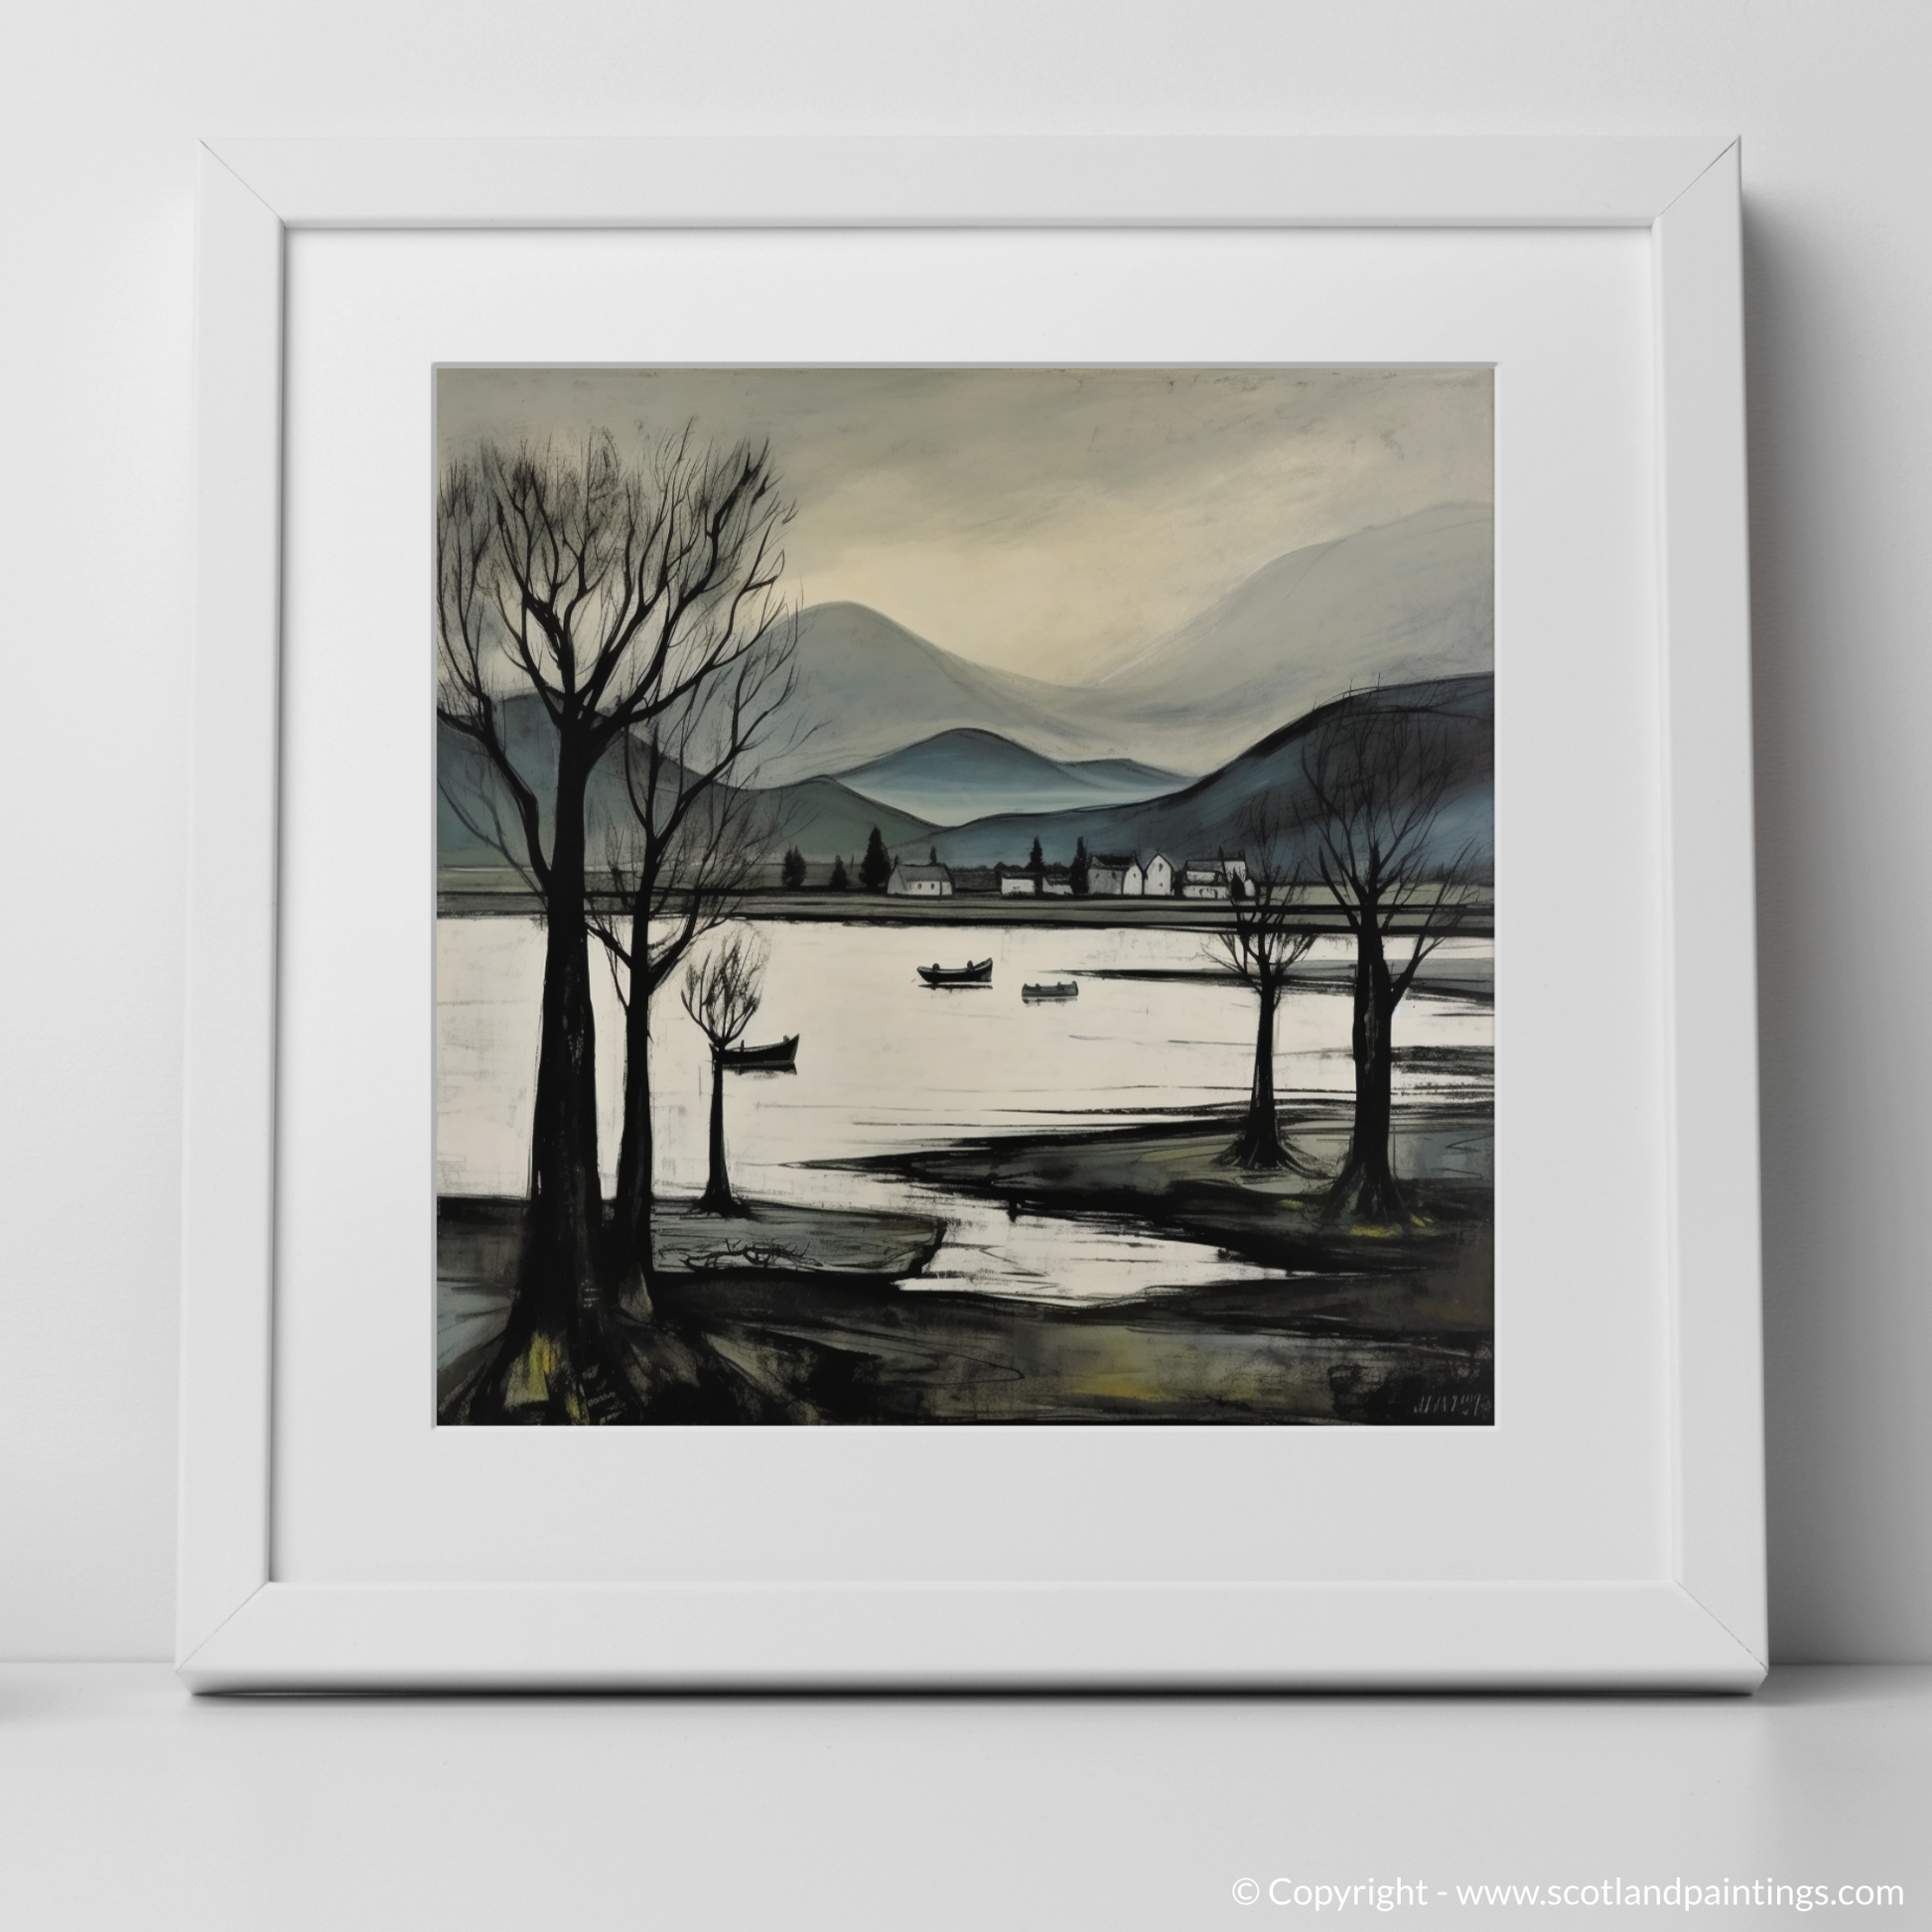 Art Print of Loch Awe, Argyll and Bute with a white frame